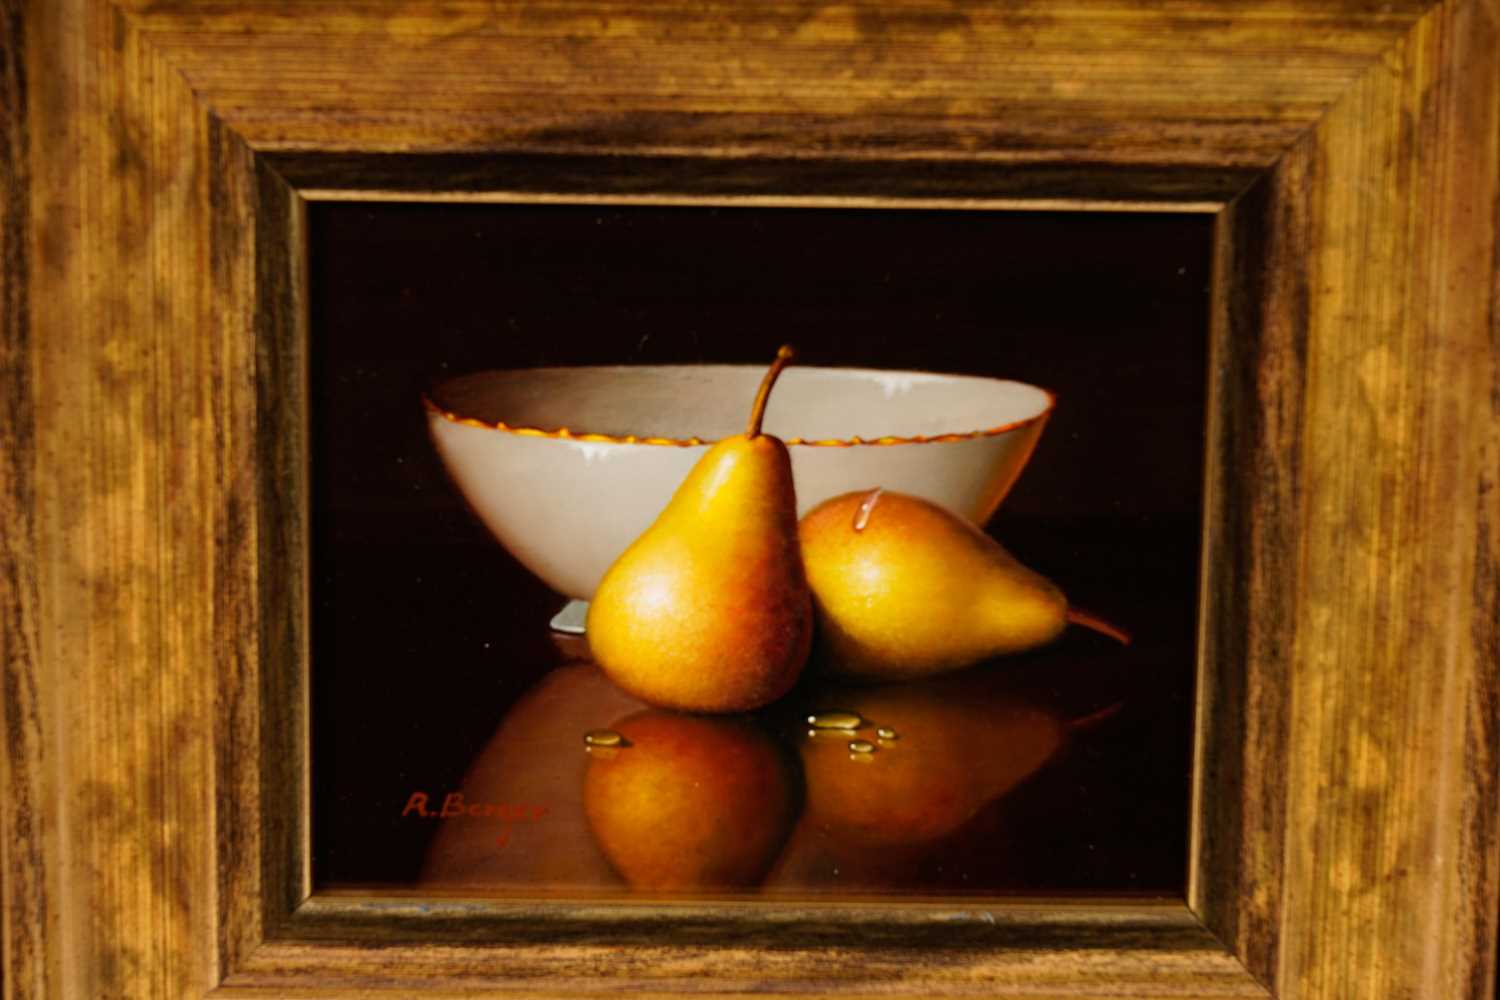 Ronald Berger - Porcelain and Pears | oil - Image 3 of 5